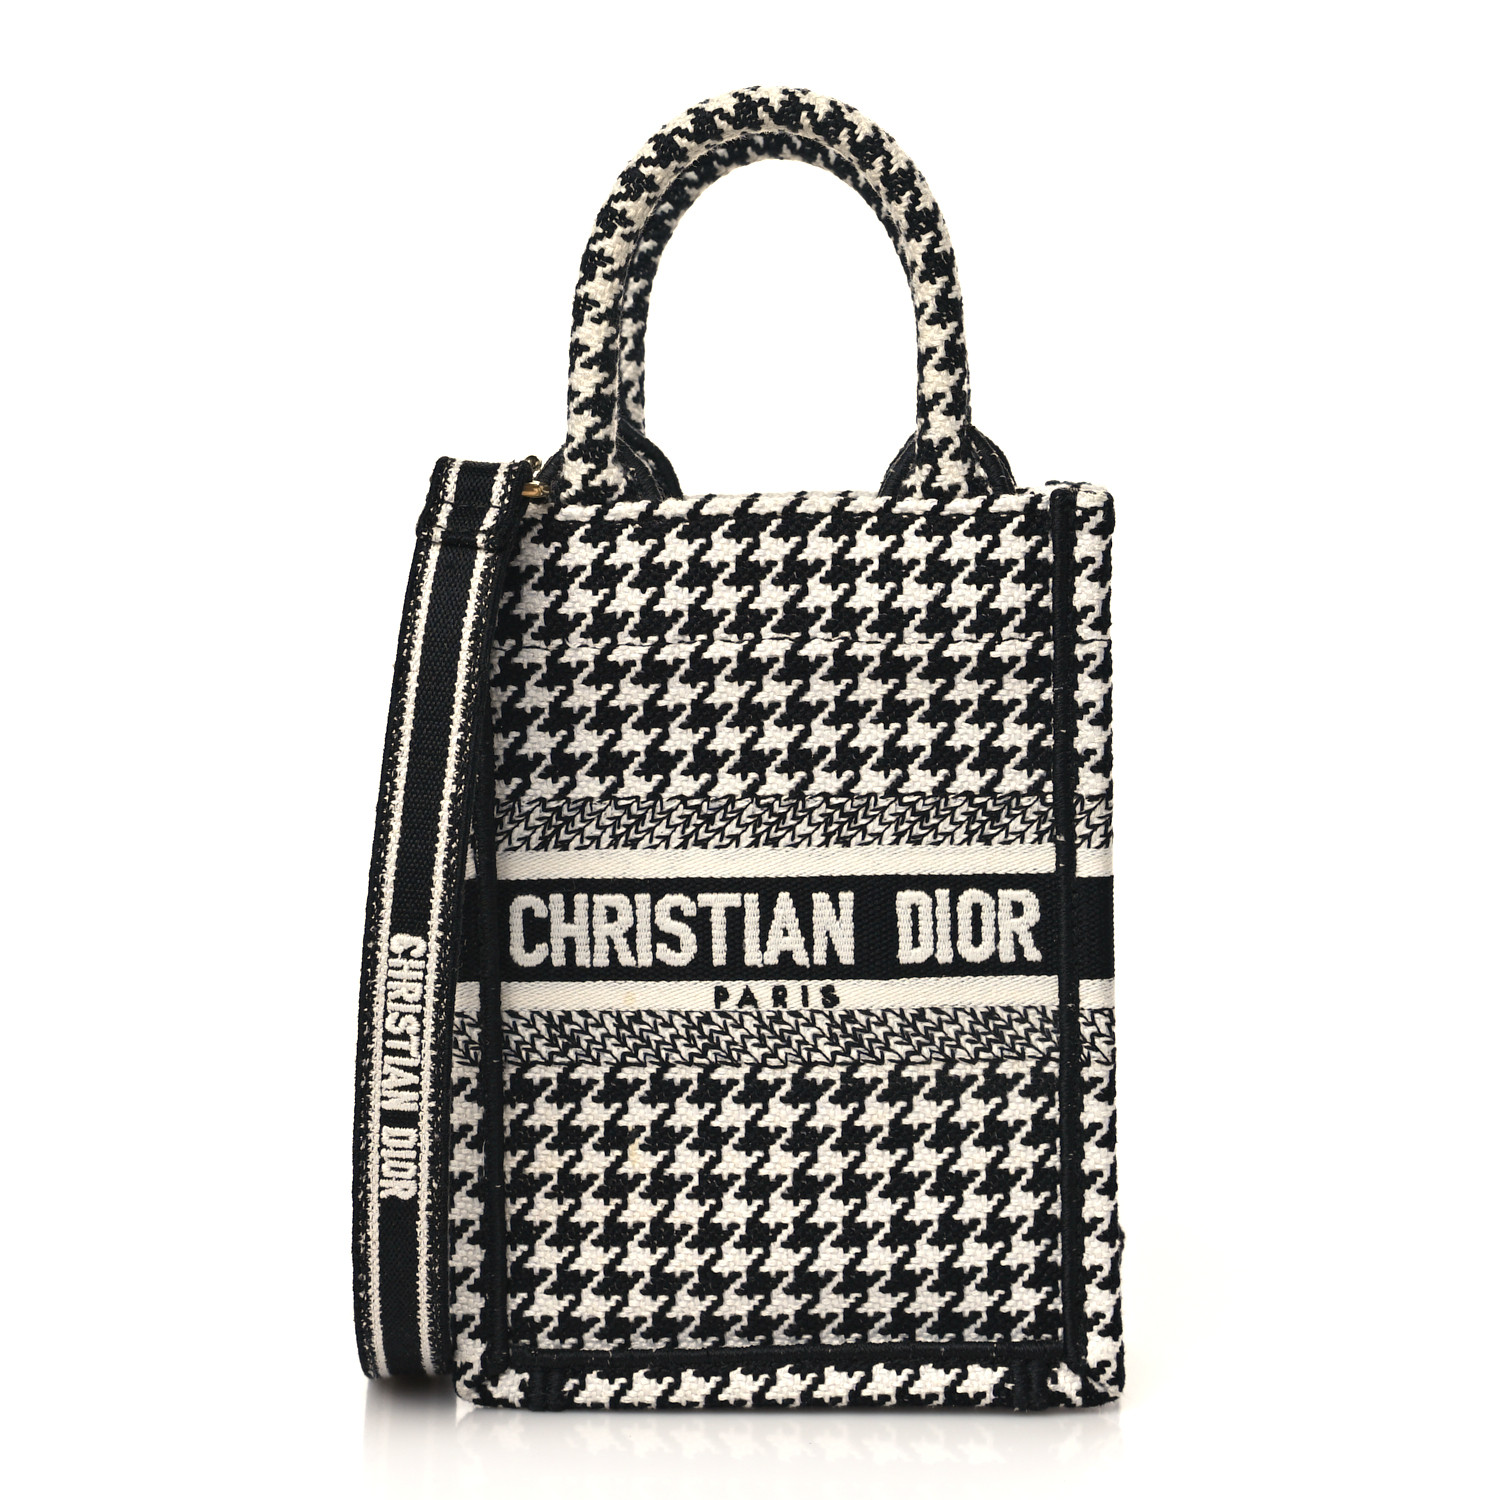 CHRISTIAN DIOR Canvas Houndstooth Embroidered Mini Book Tote Phone Bag Black White